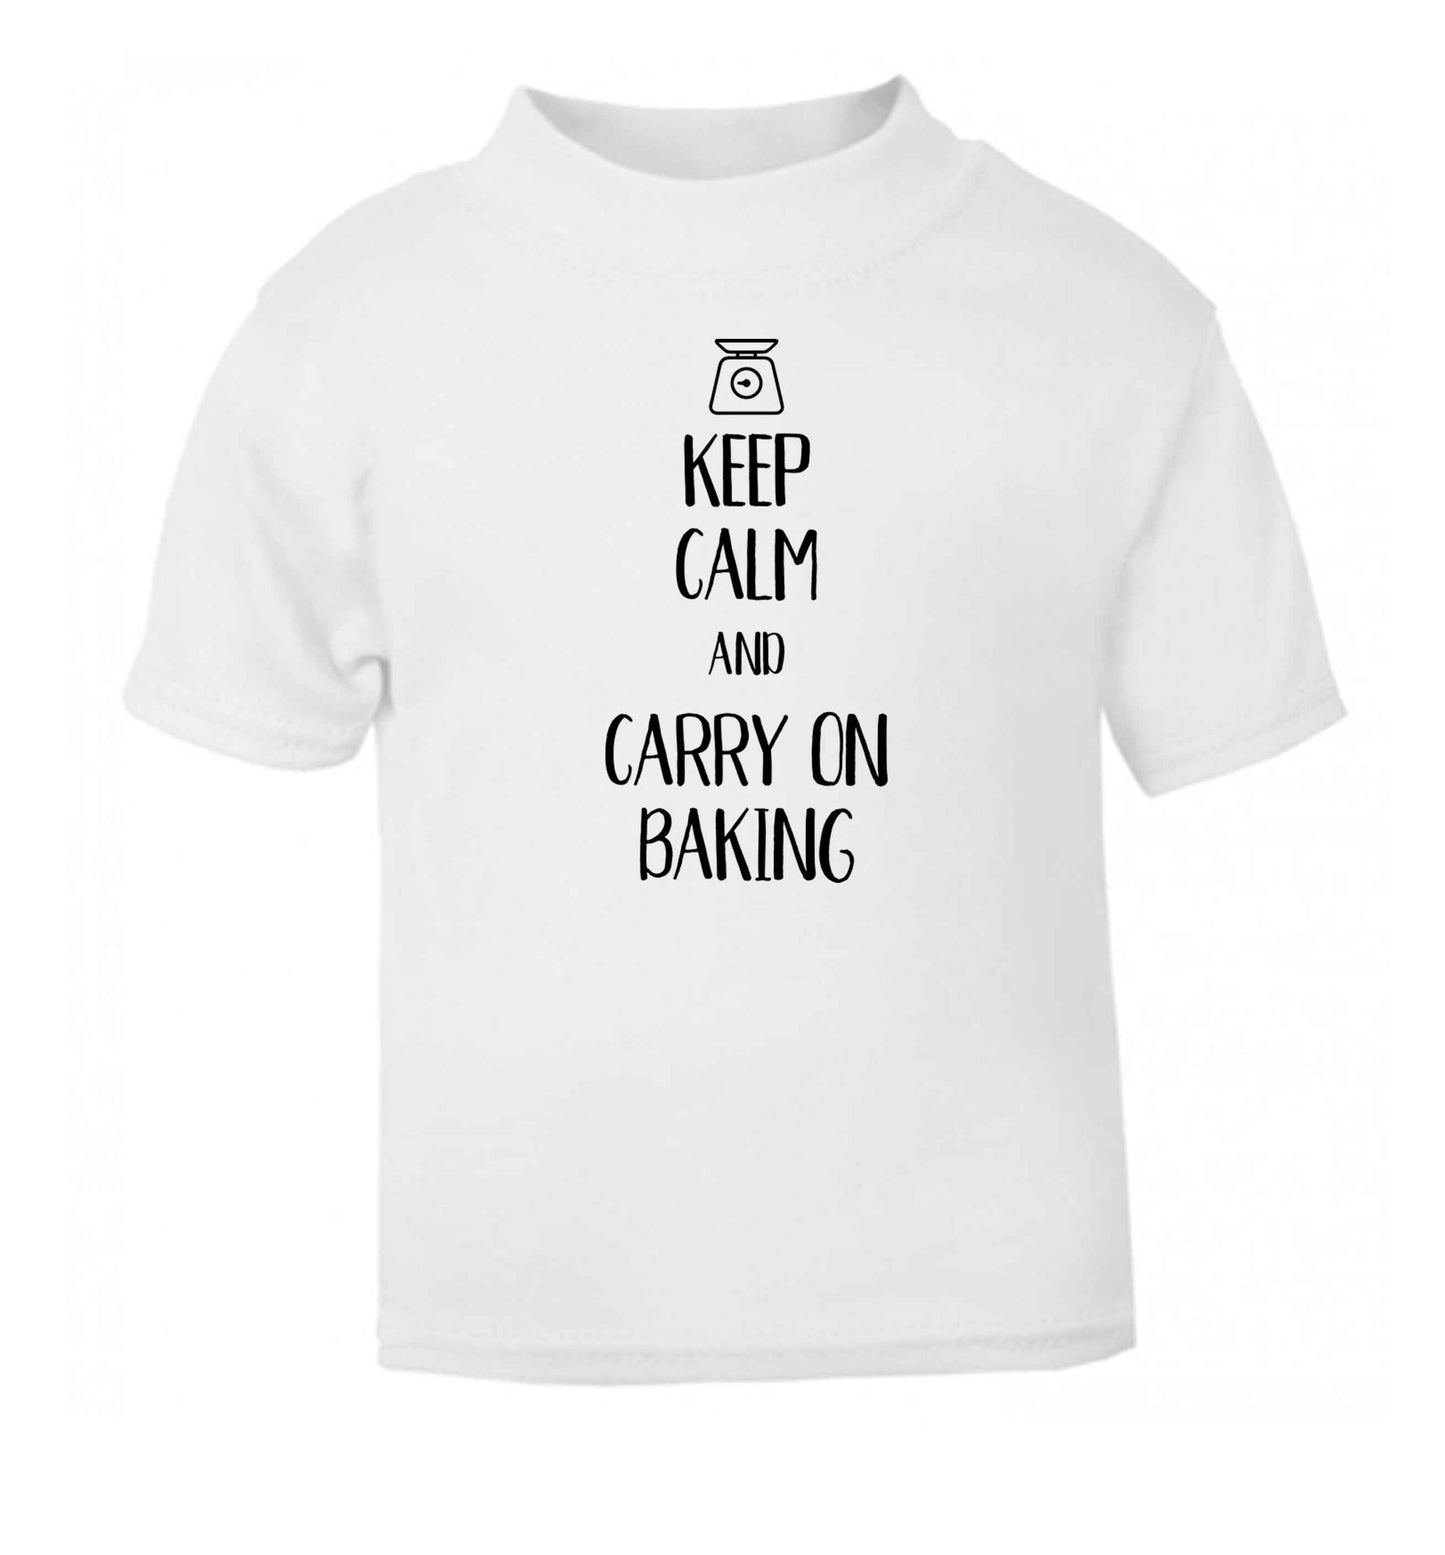 Keep calm and carry on baking white Baby Toddler Tshirt 2 Years